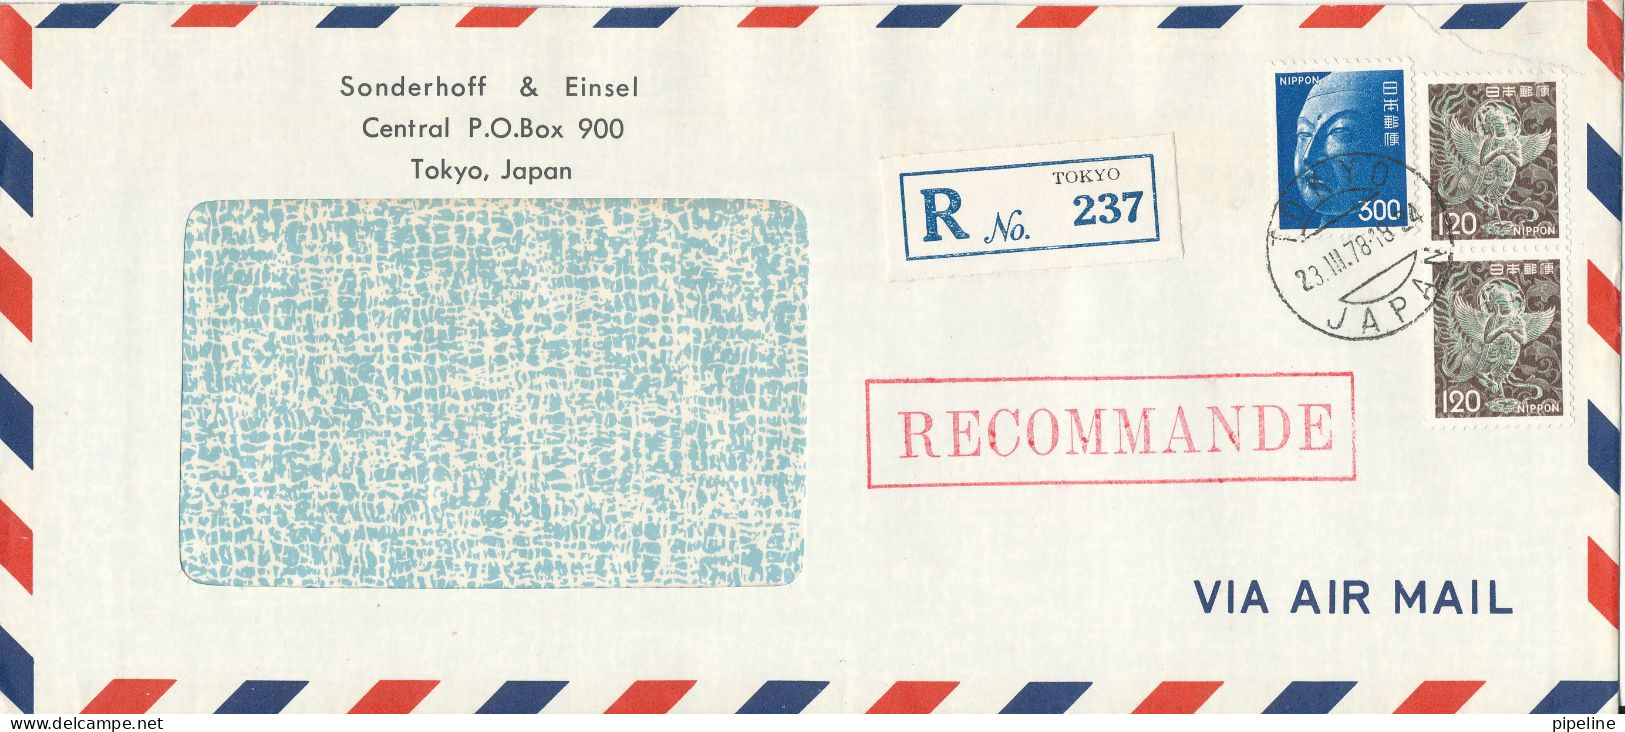 Japan Registered Air Mail Cover Sent To Germany Tokyo 23-3-1978 - Luftpost